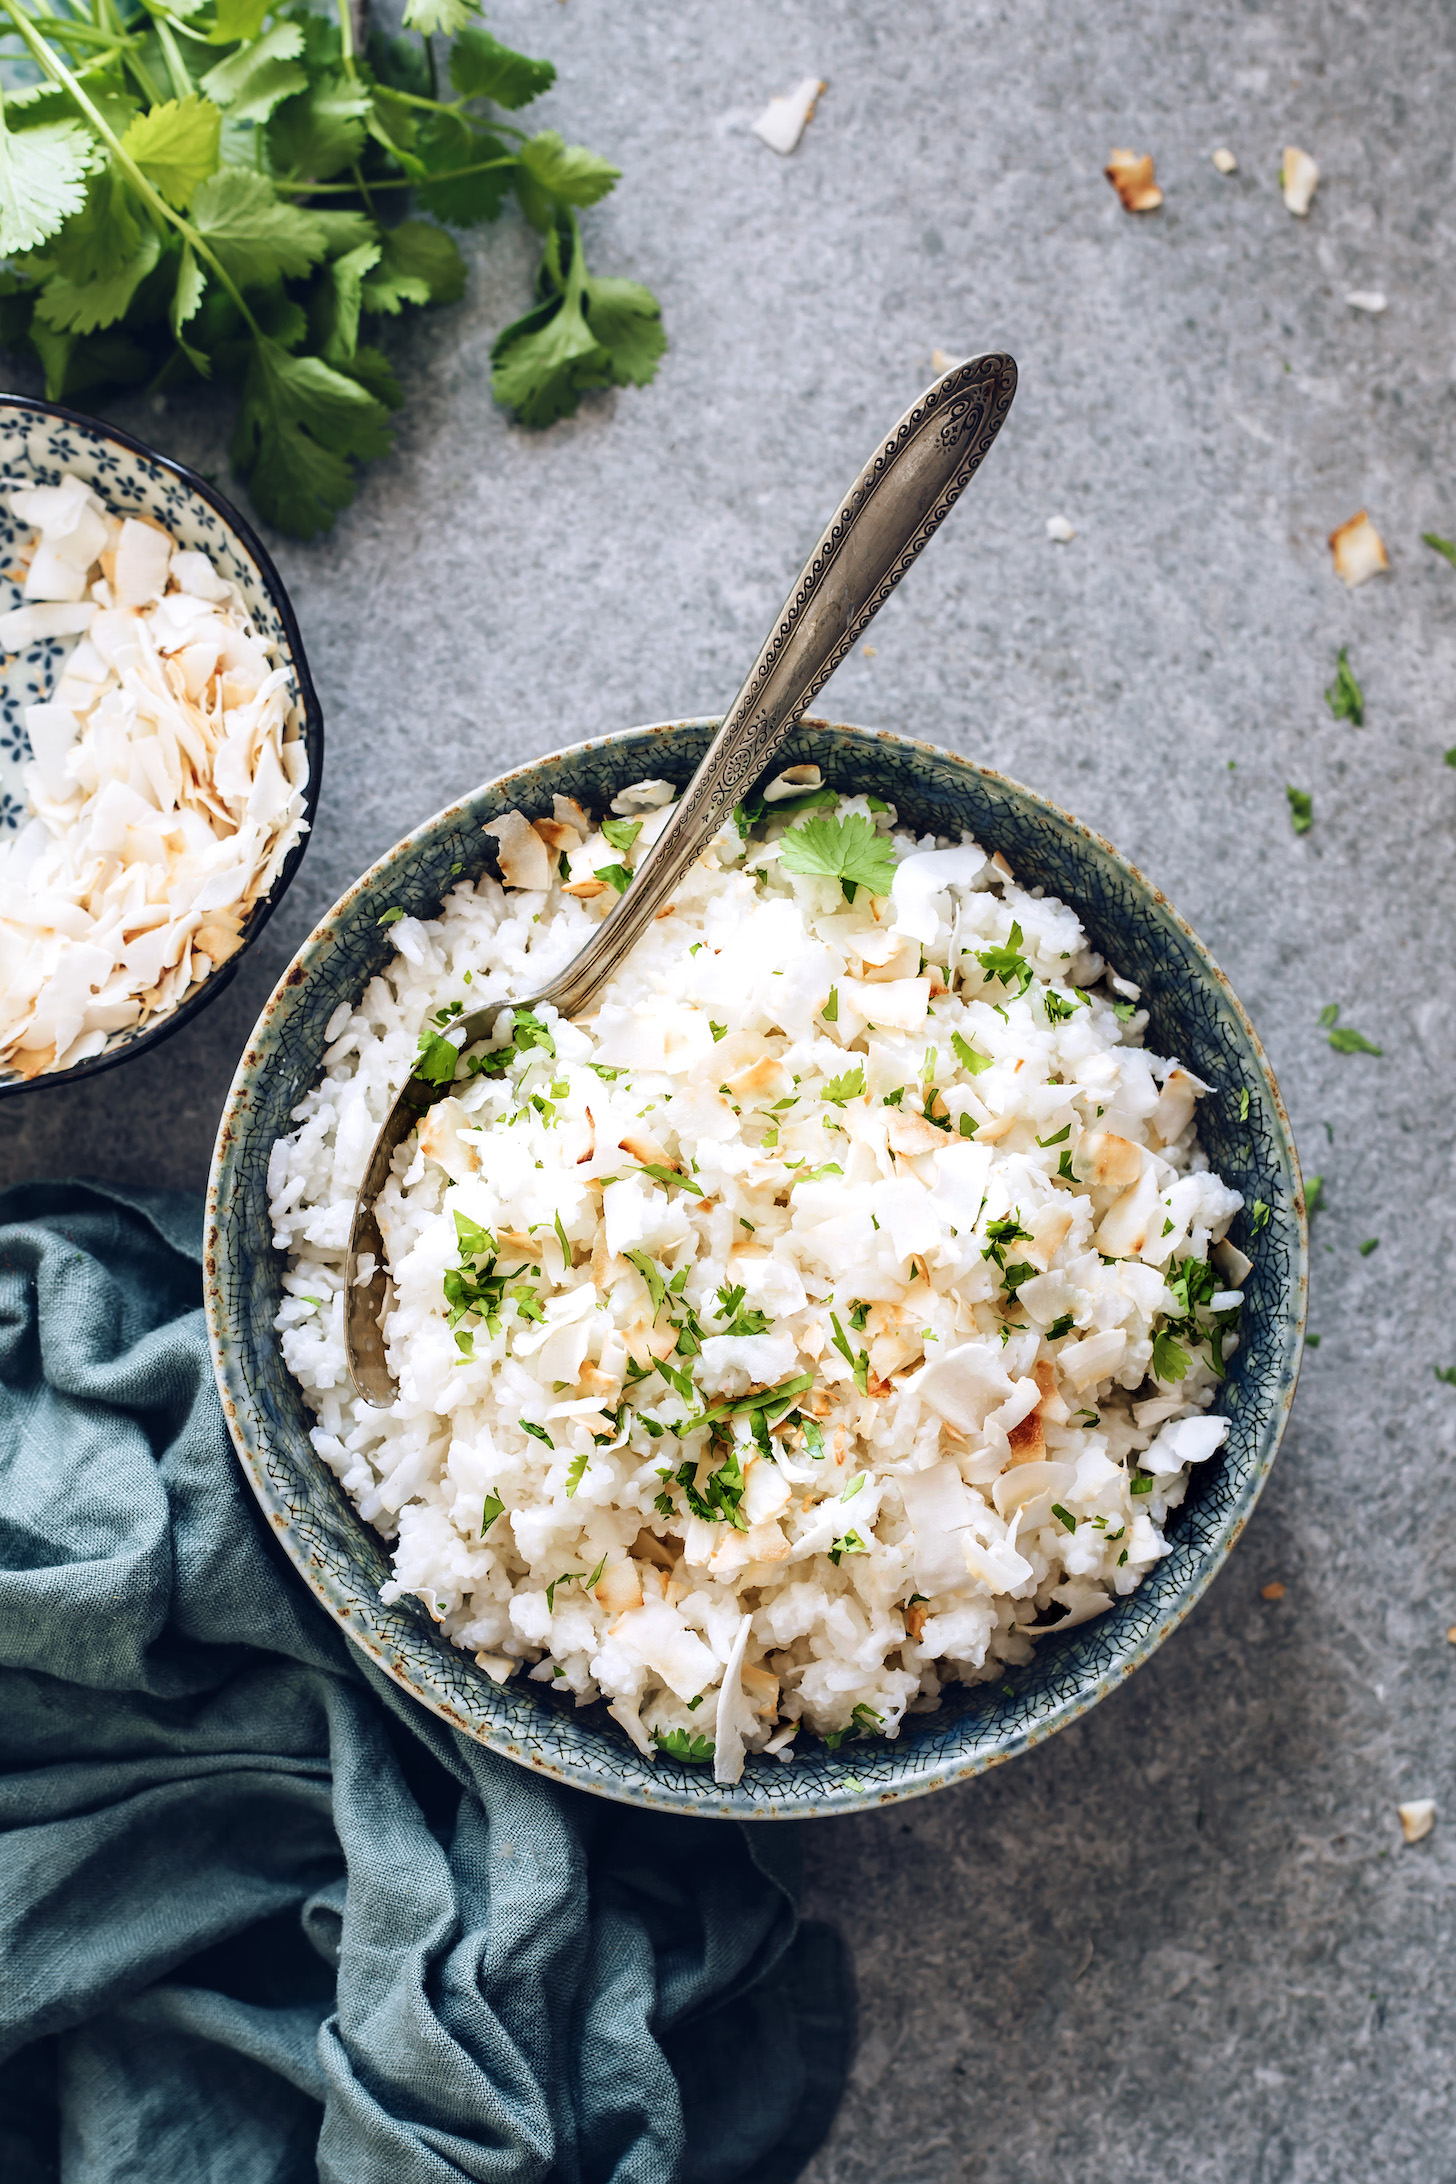 Coconut flakes beside a bowl of coconut rice